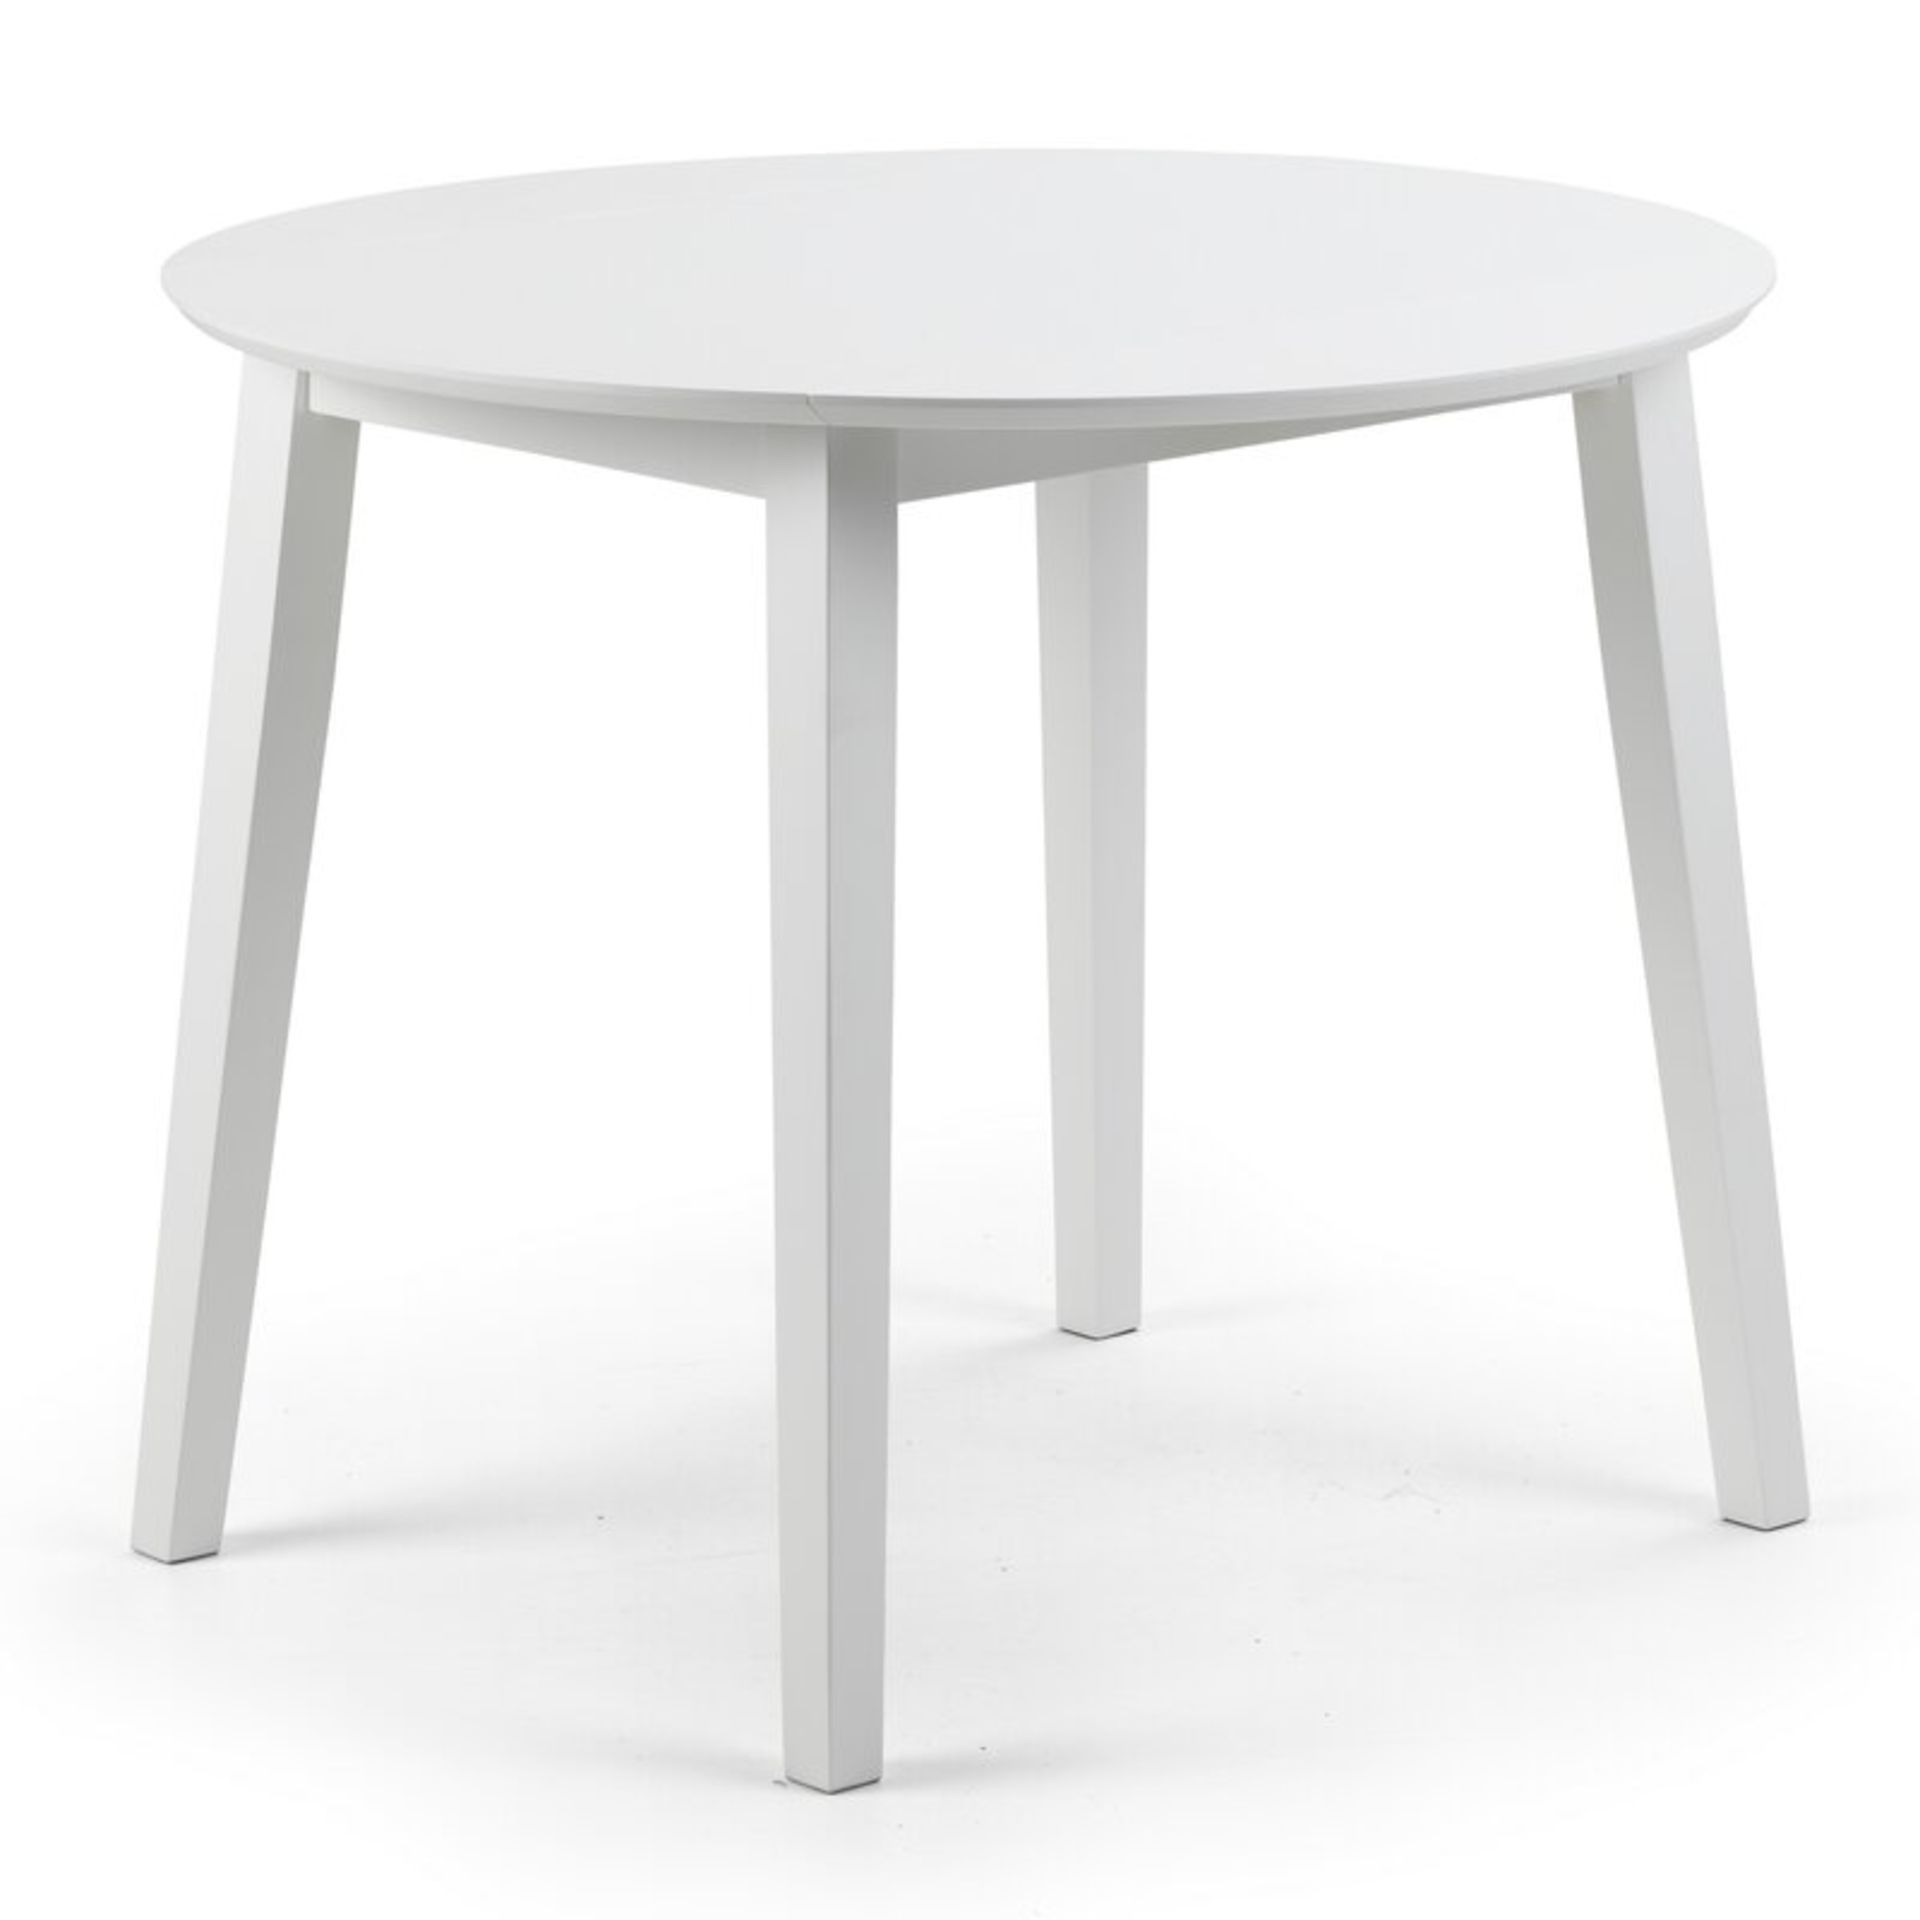 Inglewood Extendable Dining Table - RRP £119.99